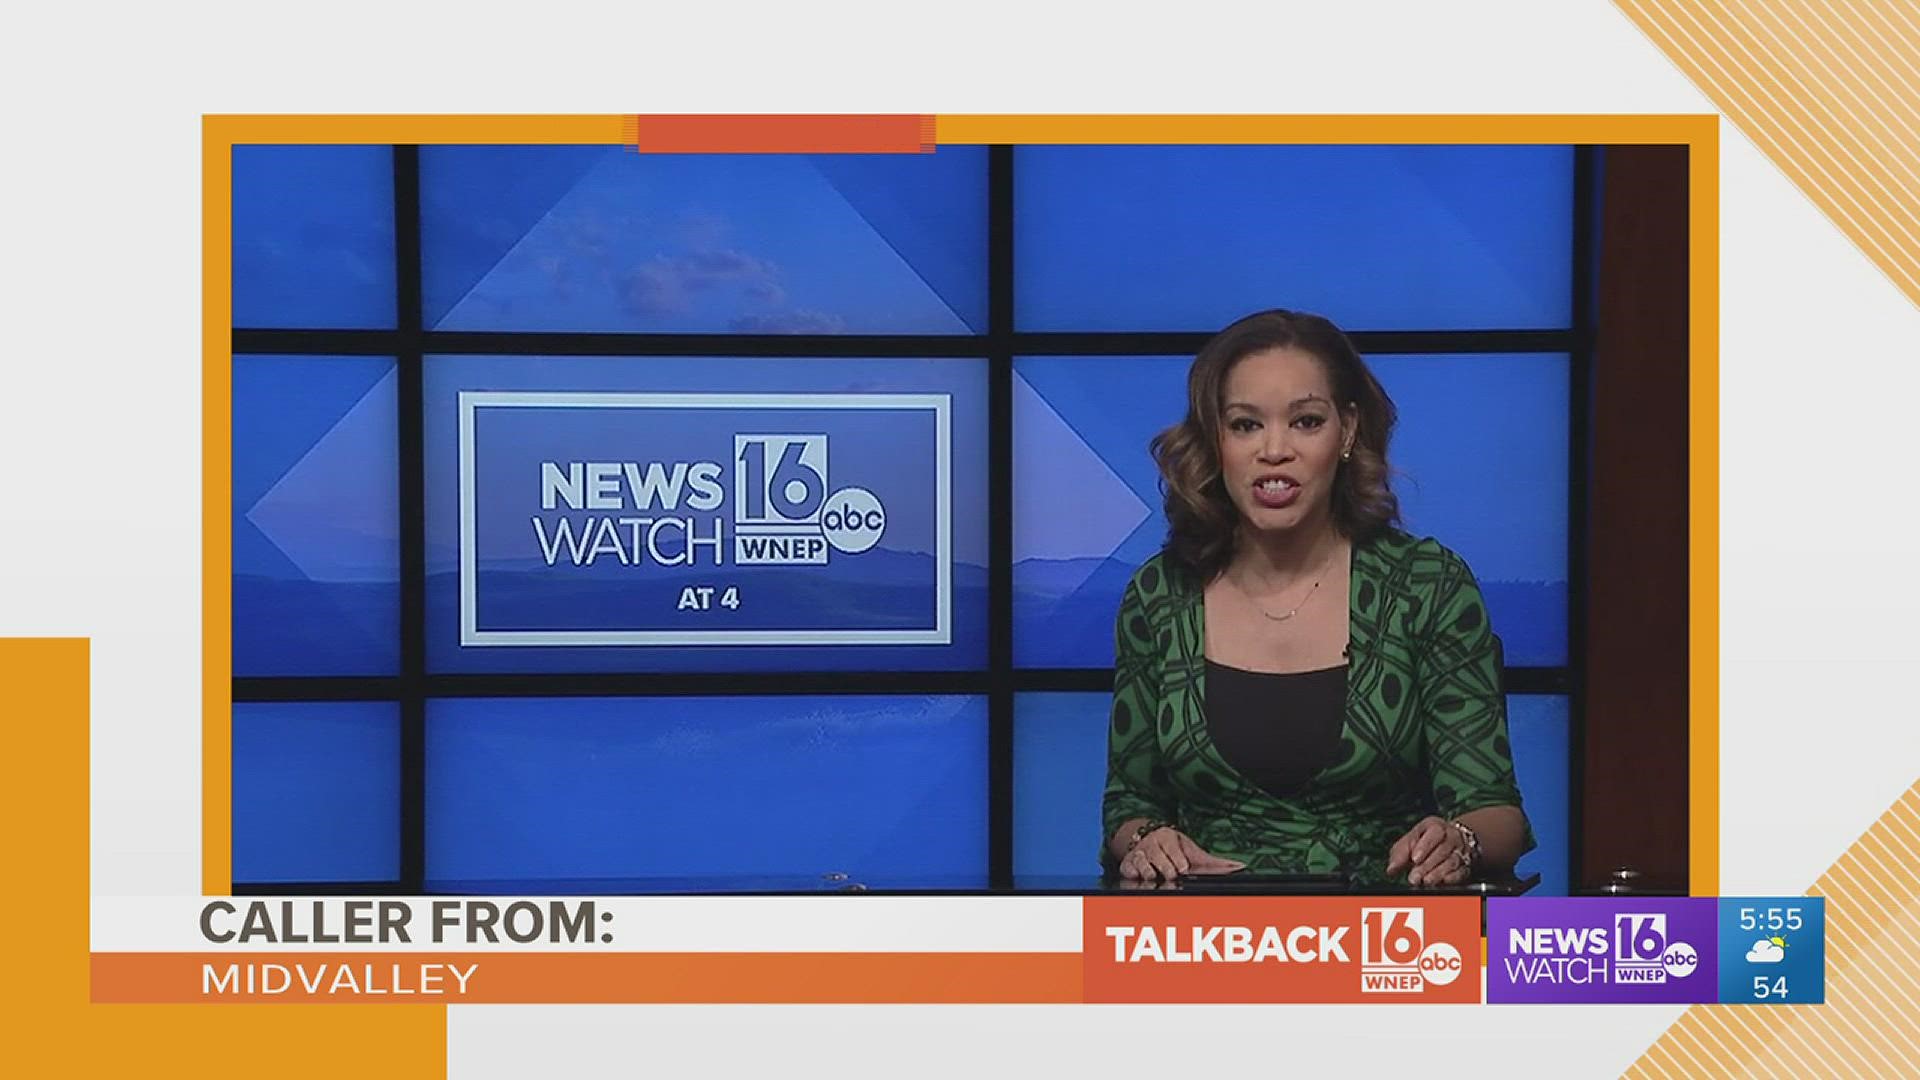 A wide range of topics mostly regarding some recent news stories make up this Monday edition of Talkback 16.